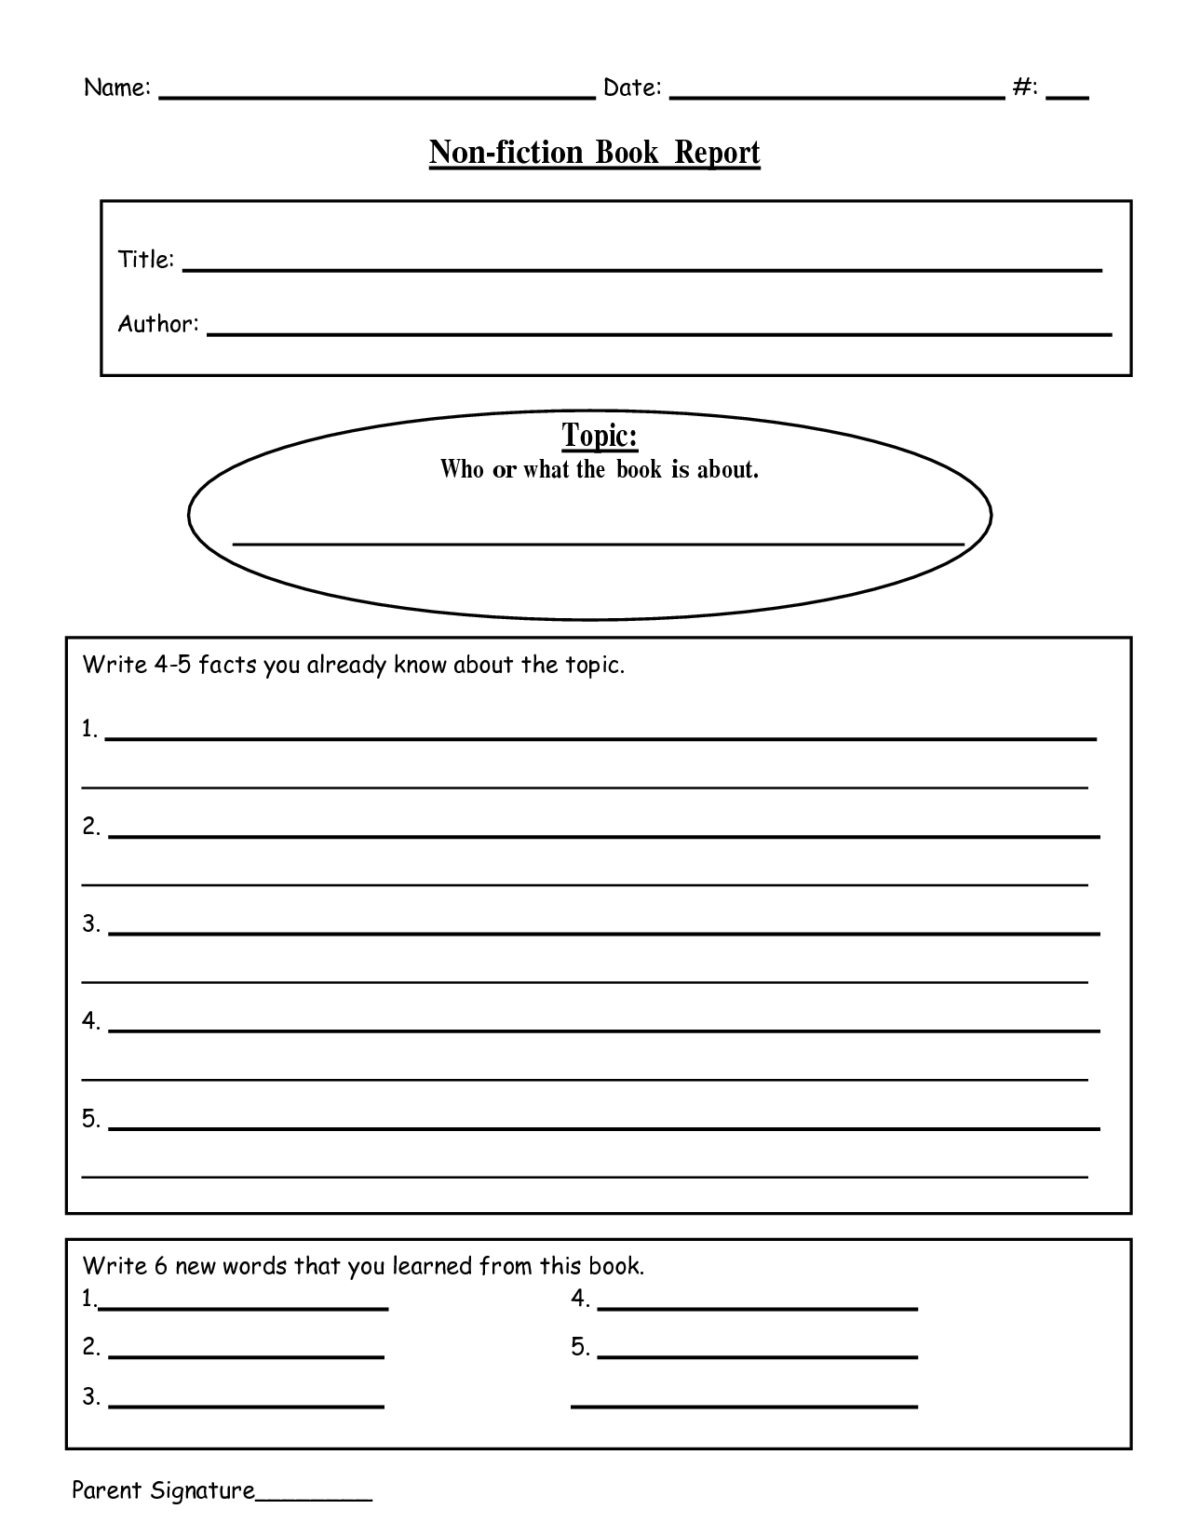 28-images-of-5th-grade-non-fiction-book-report-template-within-book